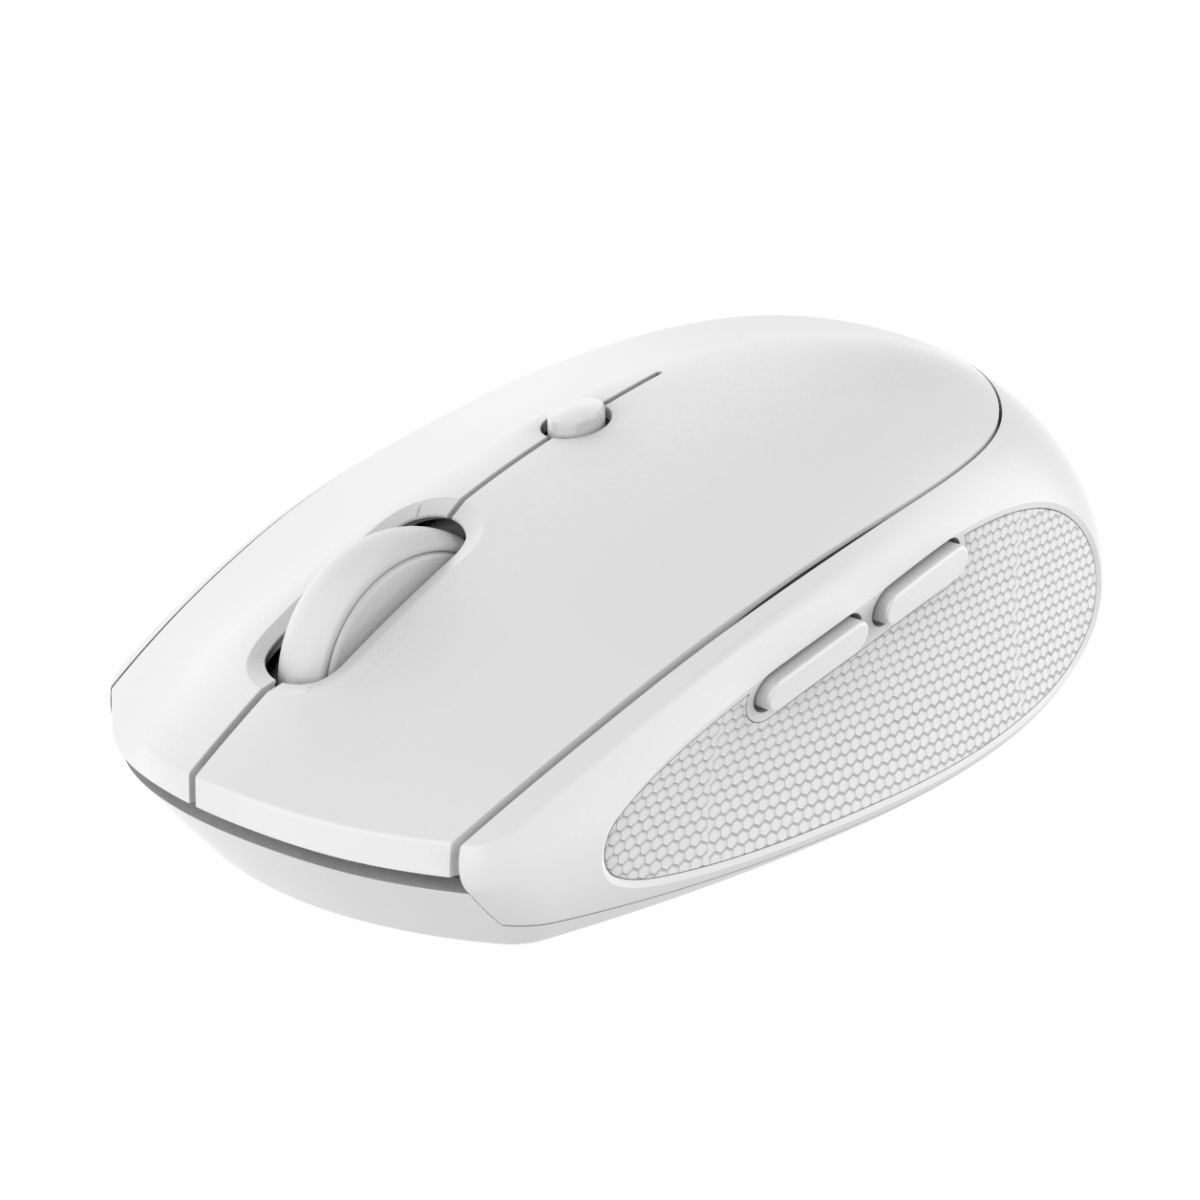 Portronics(POR 1958)Toad 30 Wireless Mouse with 2.4 GHz Connectivity, USB Receiver, 6 Buttons, Adjus